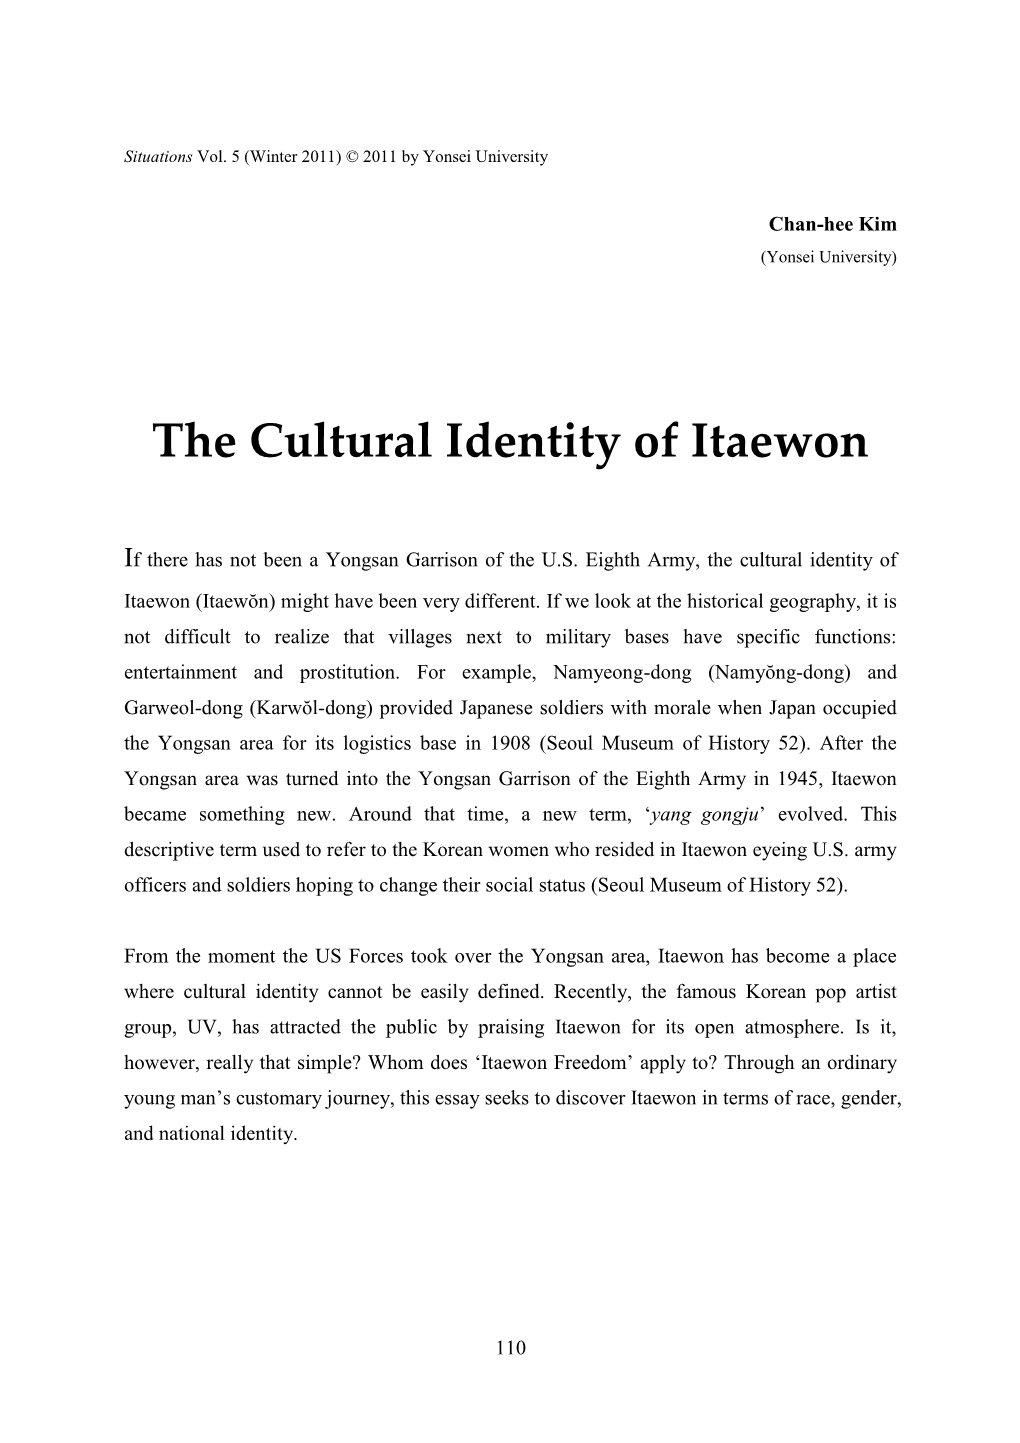 The Cultural Identity of Itaewon